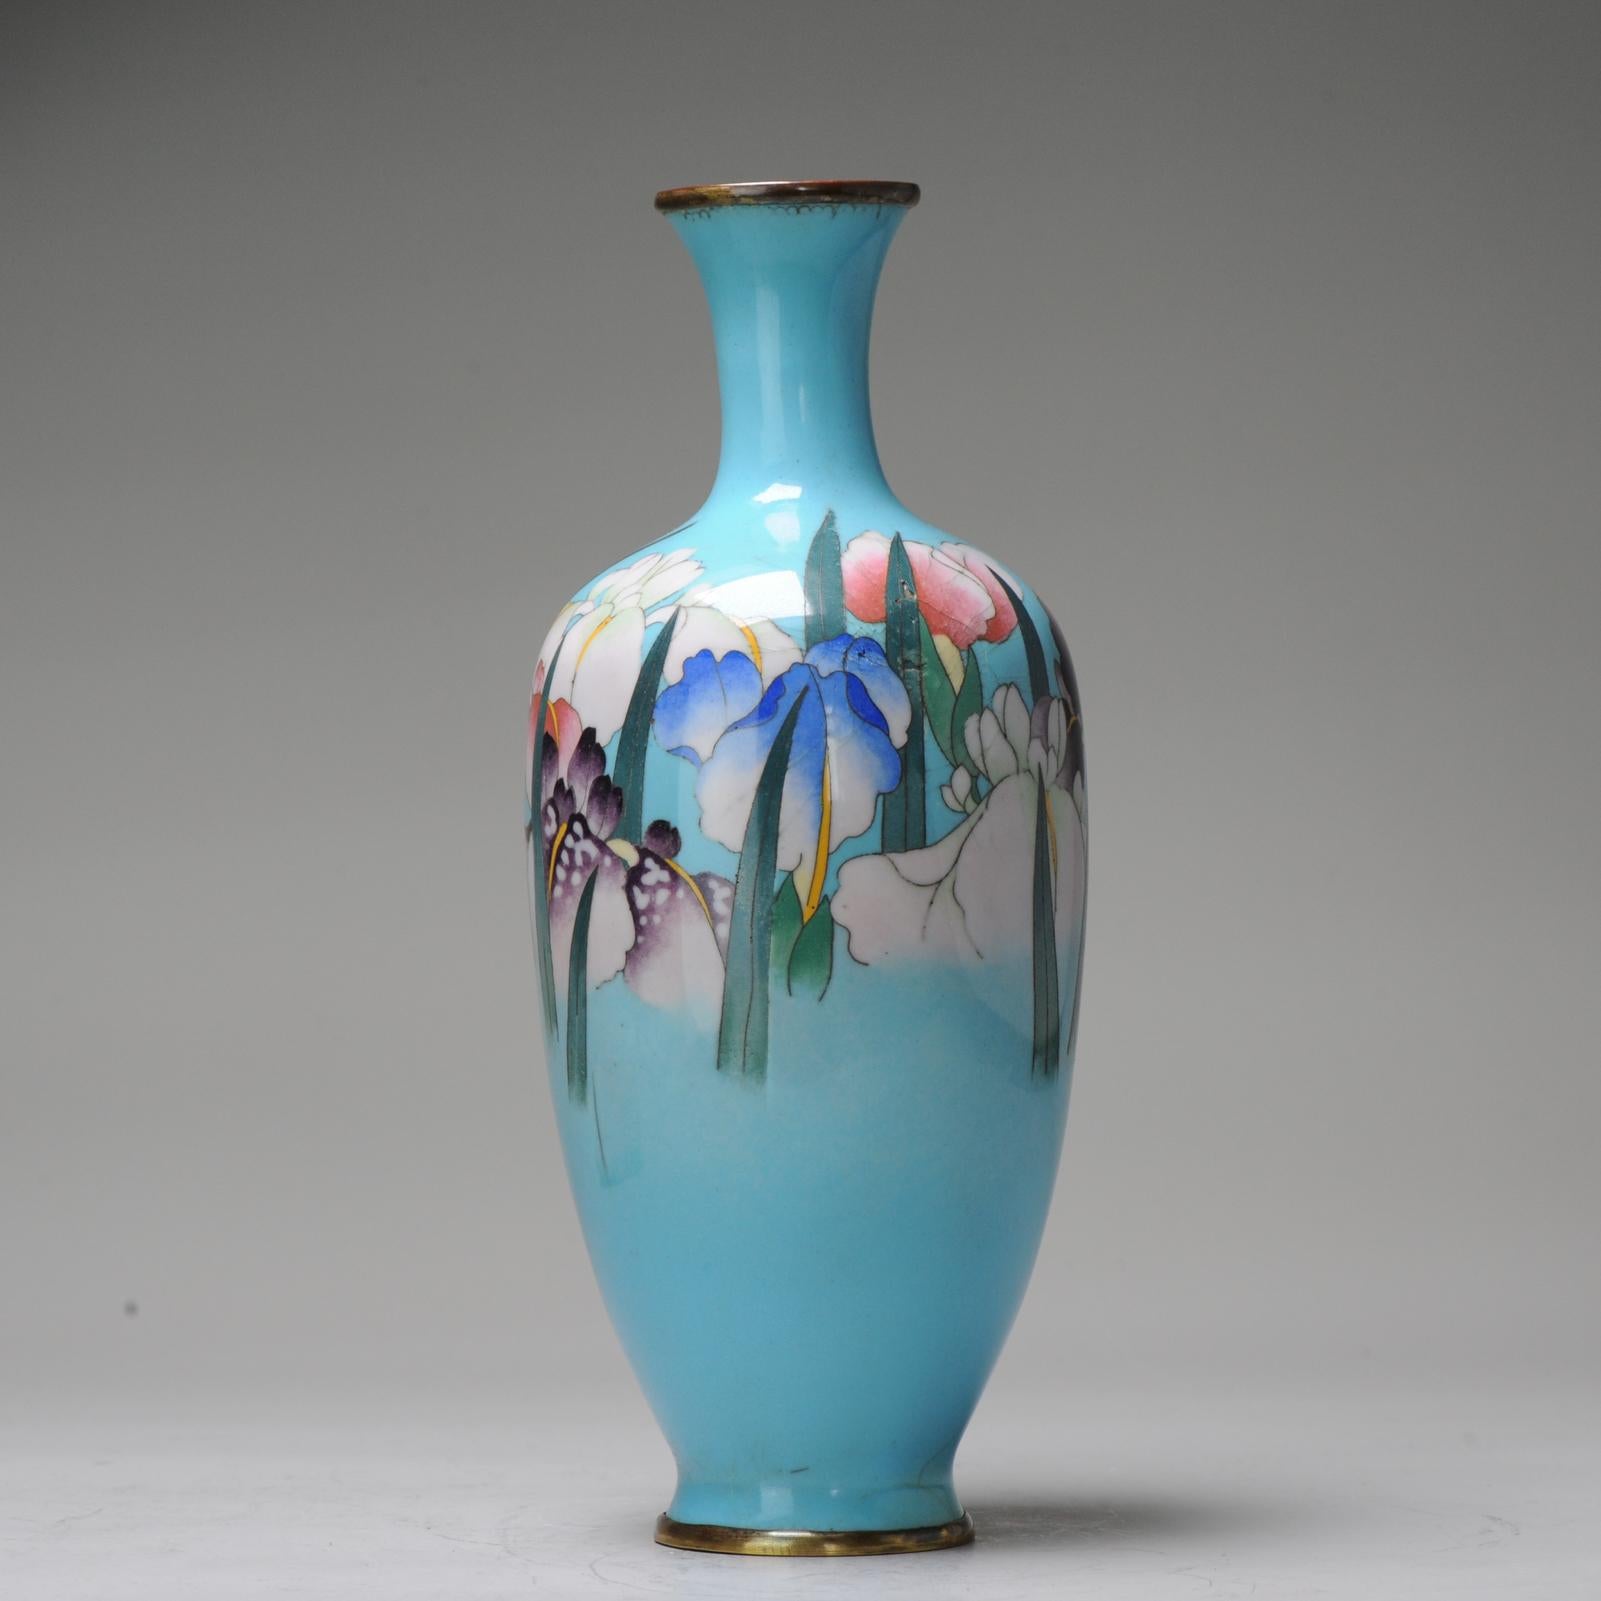 Description
Absolute top Quality vase with superb decoration of flowers. Base marked with flaming pearl: Gonda Hirosuki. With matching box.

Reference: See similar items sold by this famous artist at Bonhams and Christie's

Cloisonné is a way